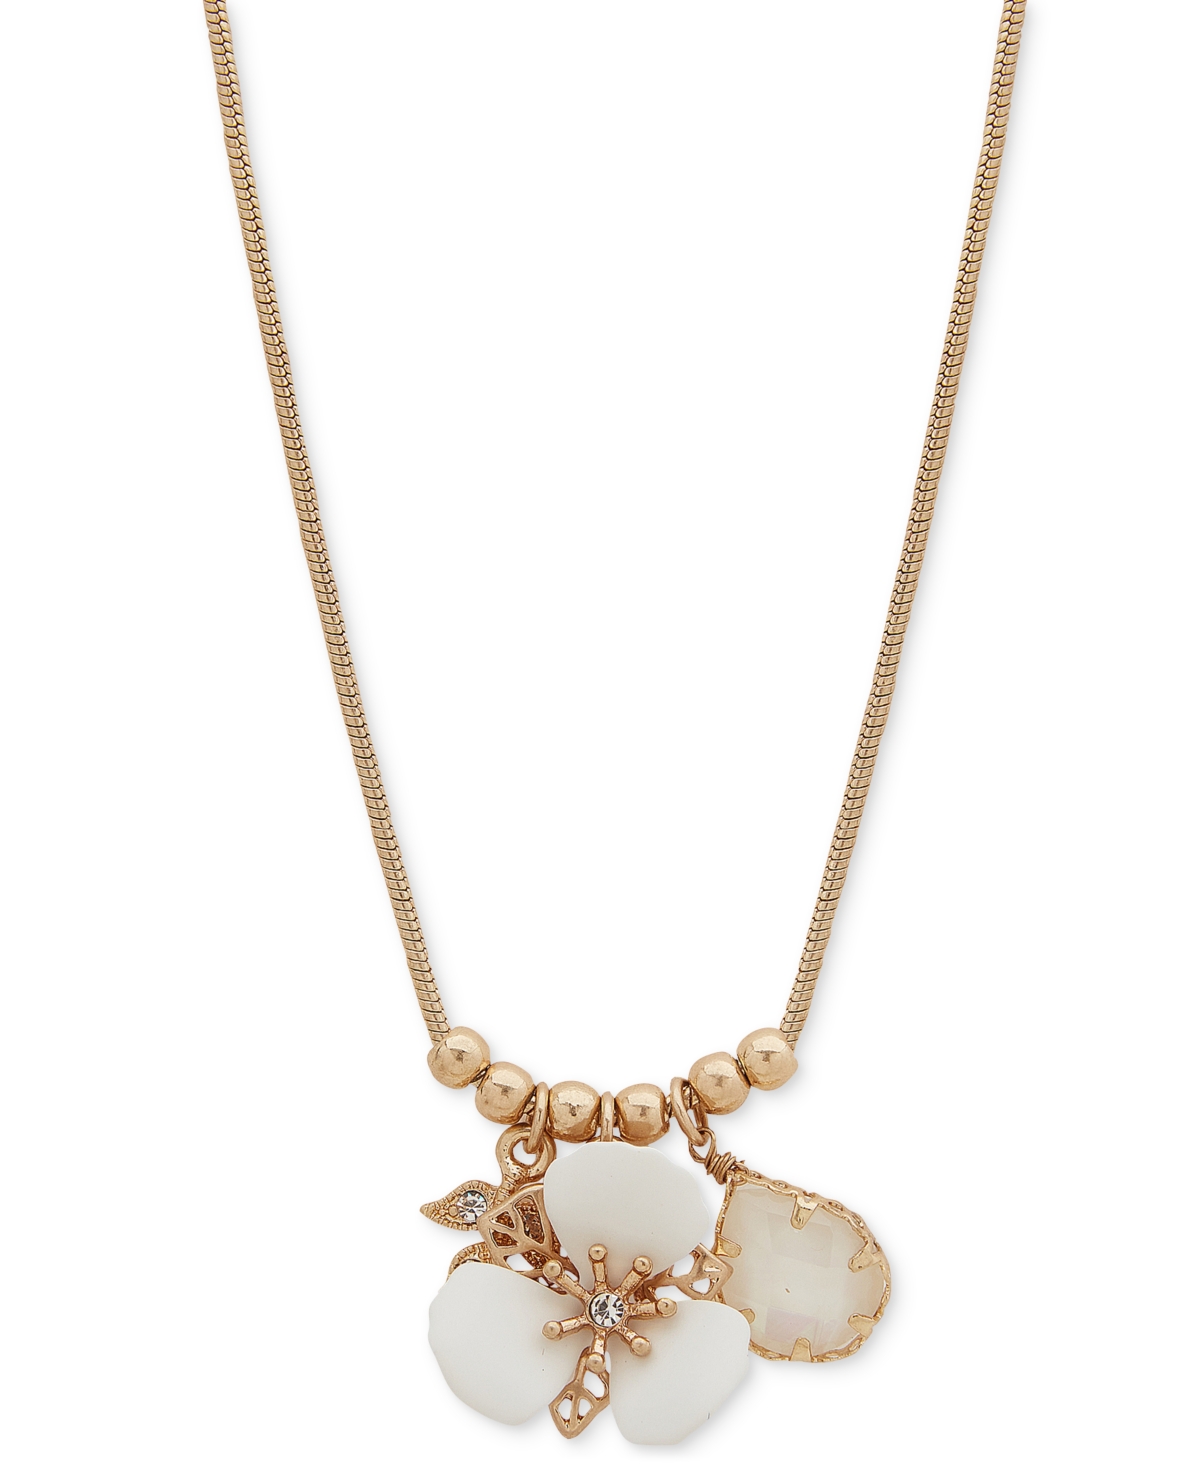 Lonna & Lilly Gold-tone Mixed Stone Flower Multi-charm Statement Necklace, 16" + 3" Extender In White